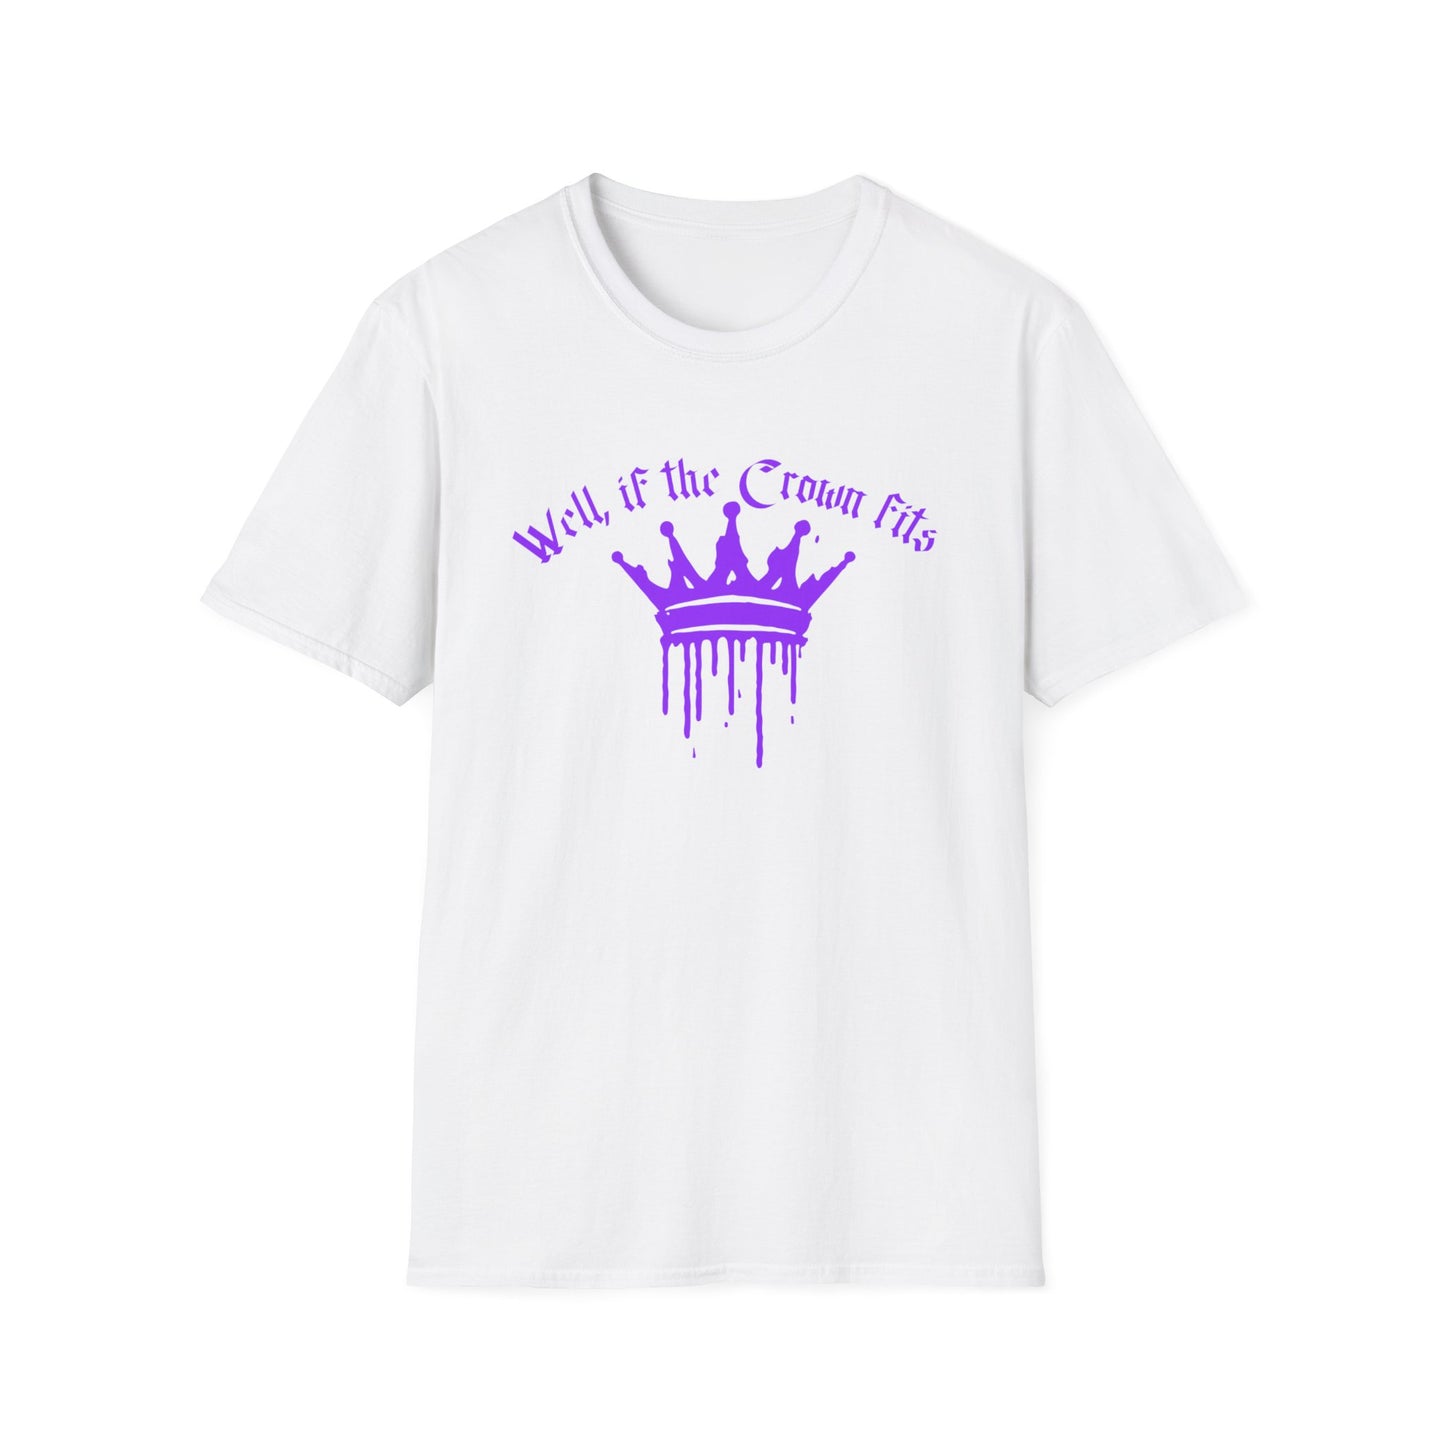 WELL IF THE CROWN FITS PURPLE CLASSIC FIT T-SHIRT